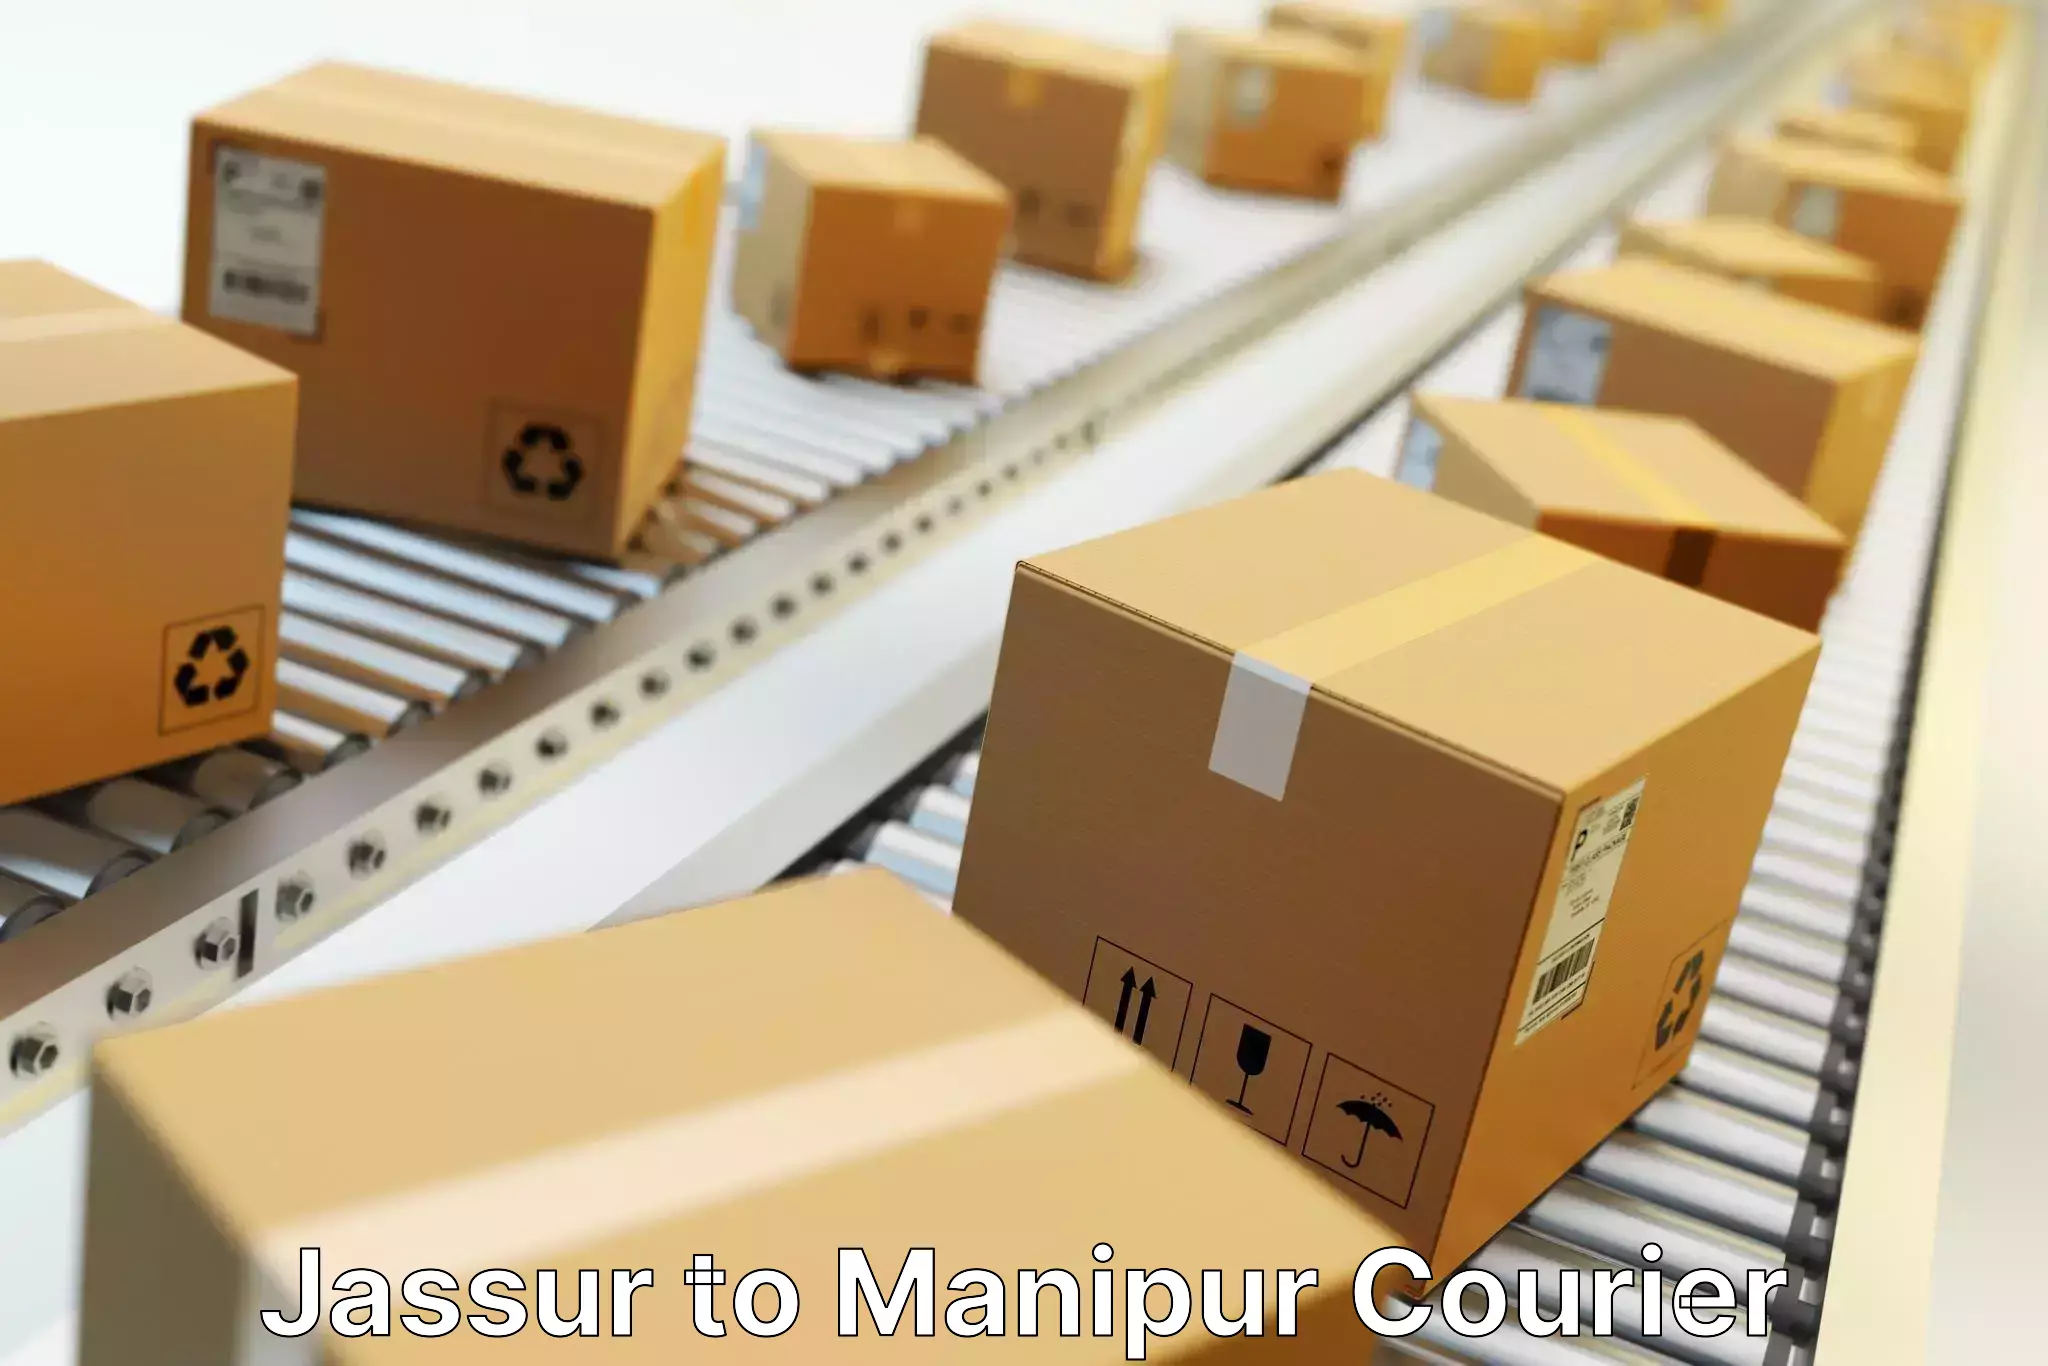 Global shipping solutions Jassur to Manipur